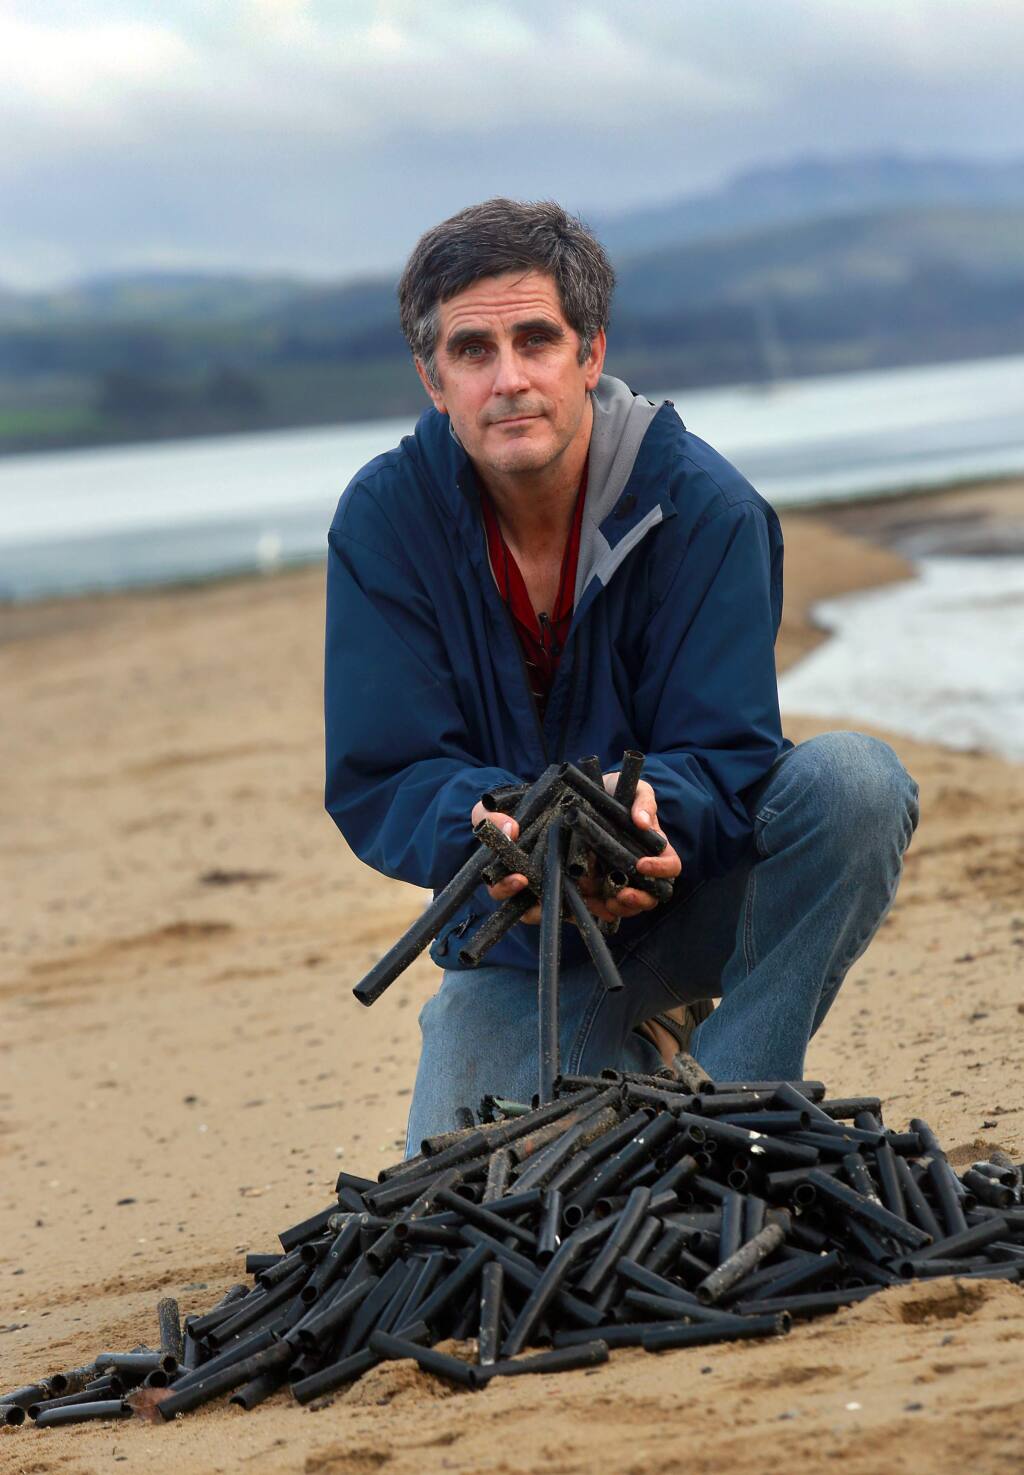 Richard James has collected thousands of black plastic tubes from the beaches of Point Reyes National Seashore over the past six years. While he links the tubes and other debris to the Drakes Bay Oyster Co., company co-owner Kevin Lunny points to previous oyster operations at the site. (Photo by John Burgess/The Press Democrat)